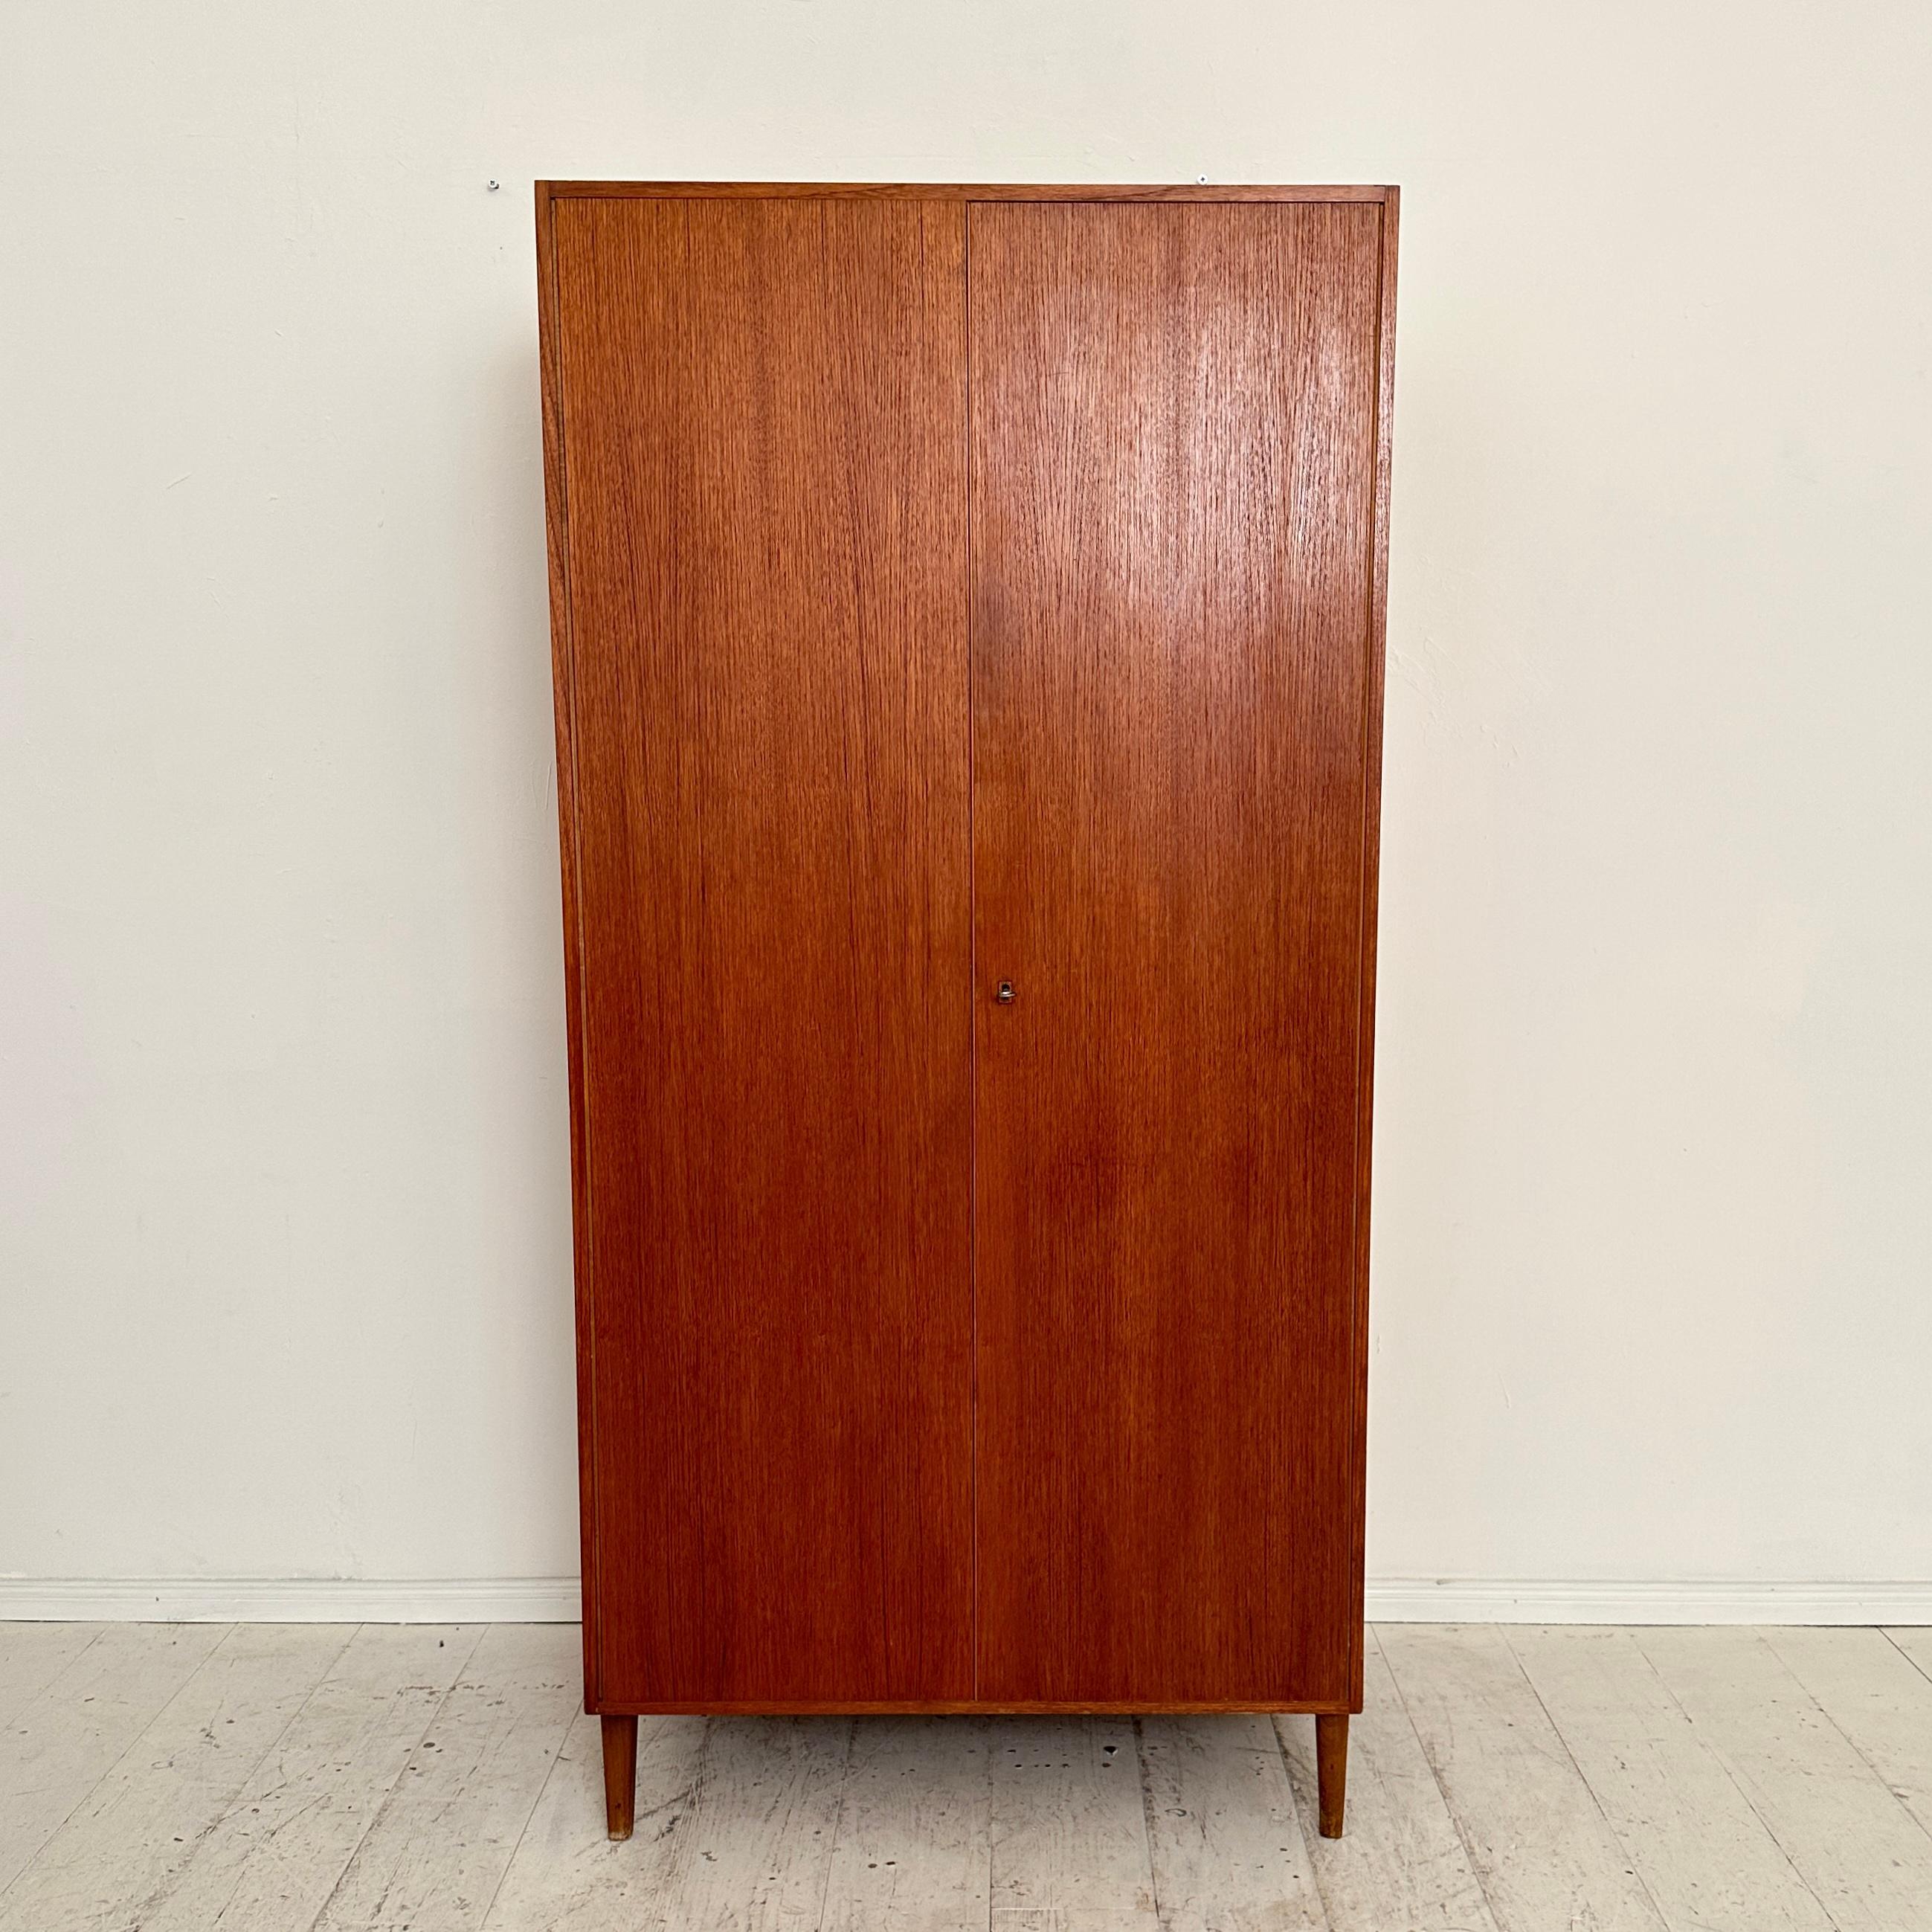 This great Mid Century Teak closet from the Deutsche Werkstätten was made around 1960. It is in very good vintage condition.
A unique piece which is a great eye-catcher for your antique, modern, space age or mid-century interior.
If you have any